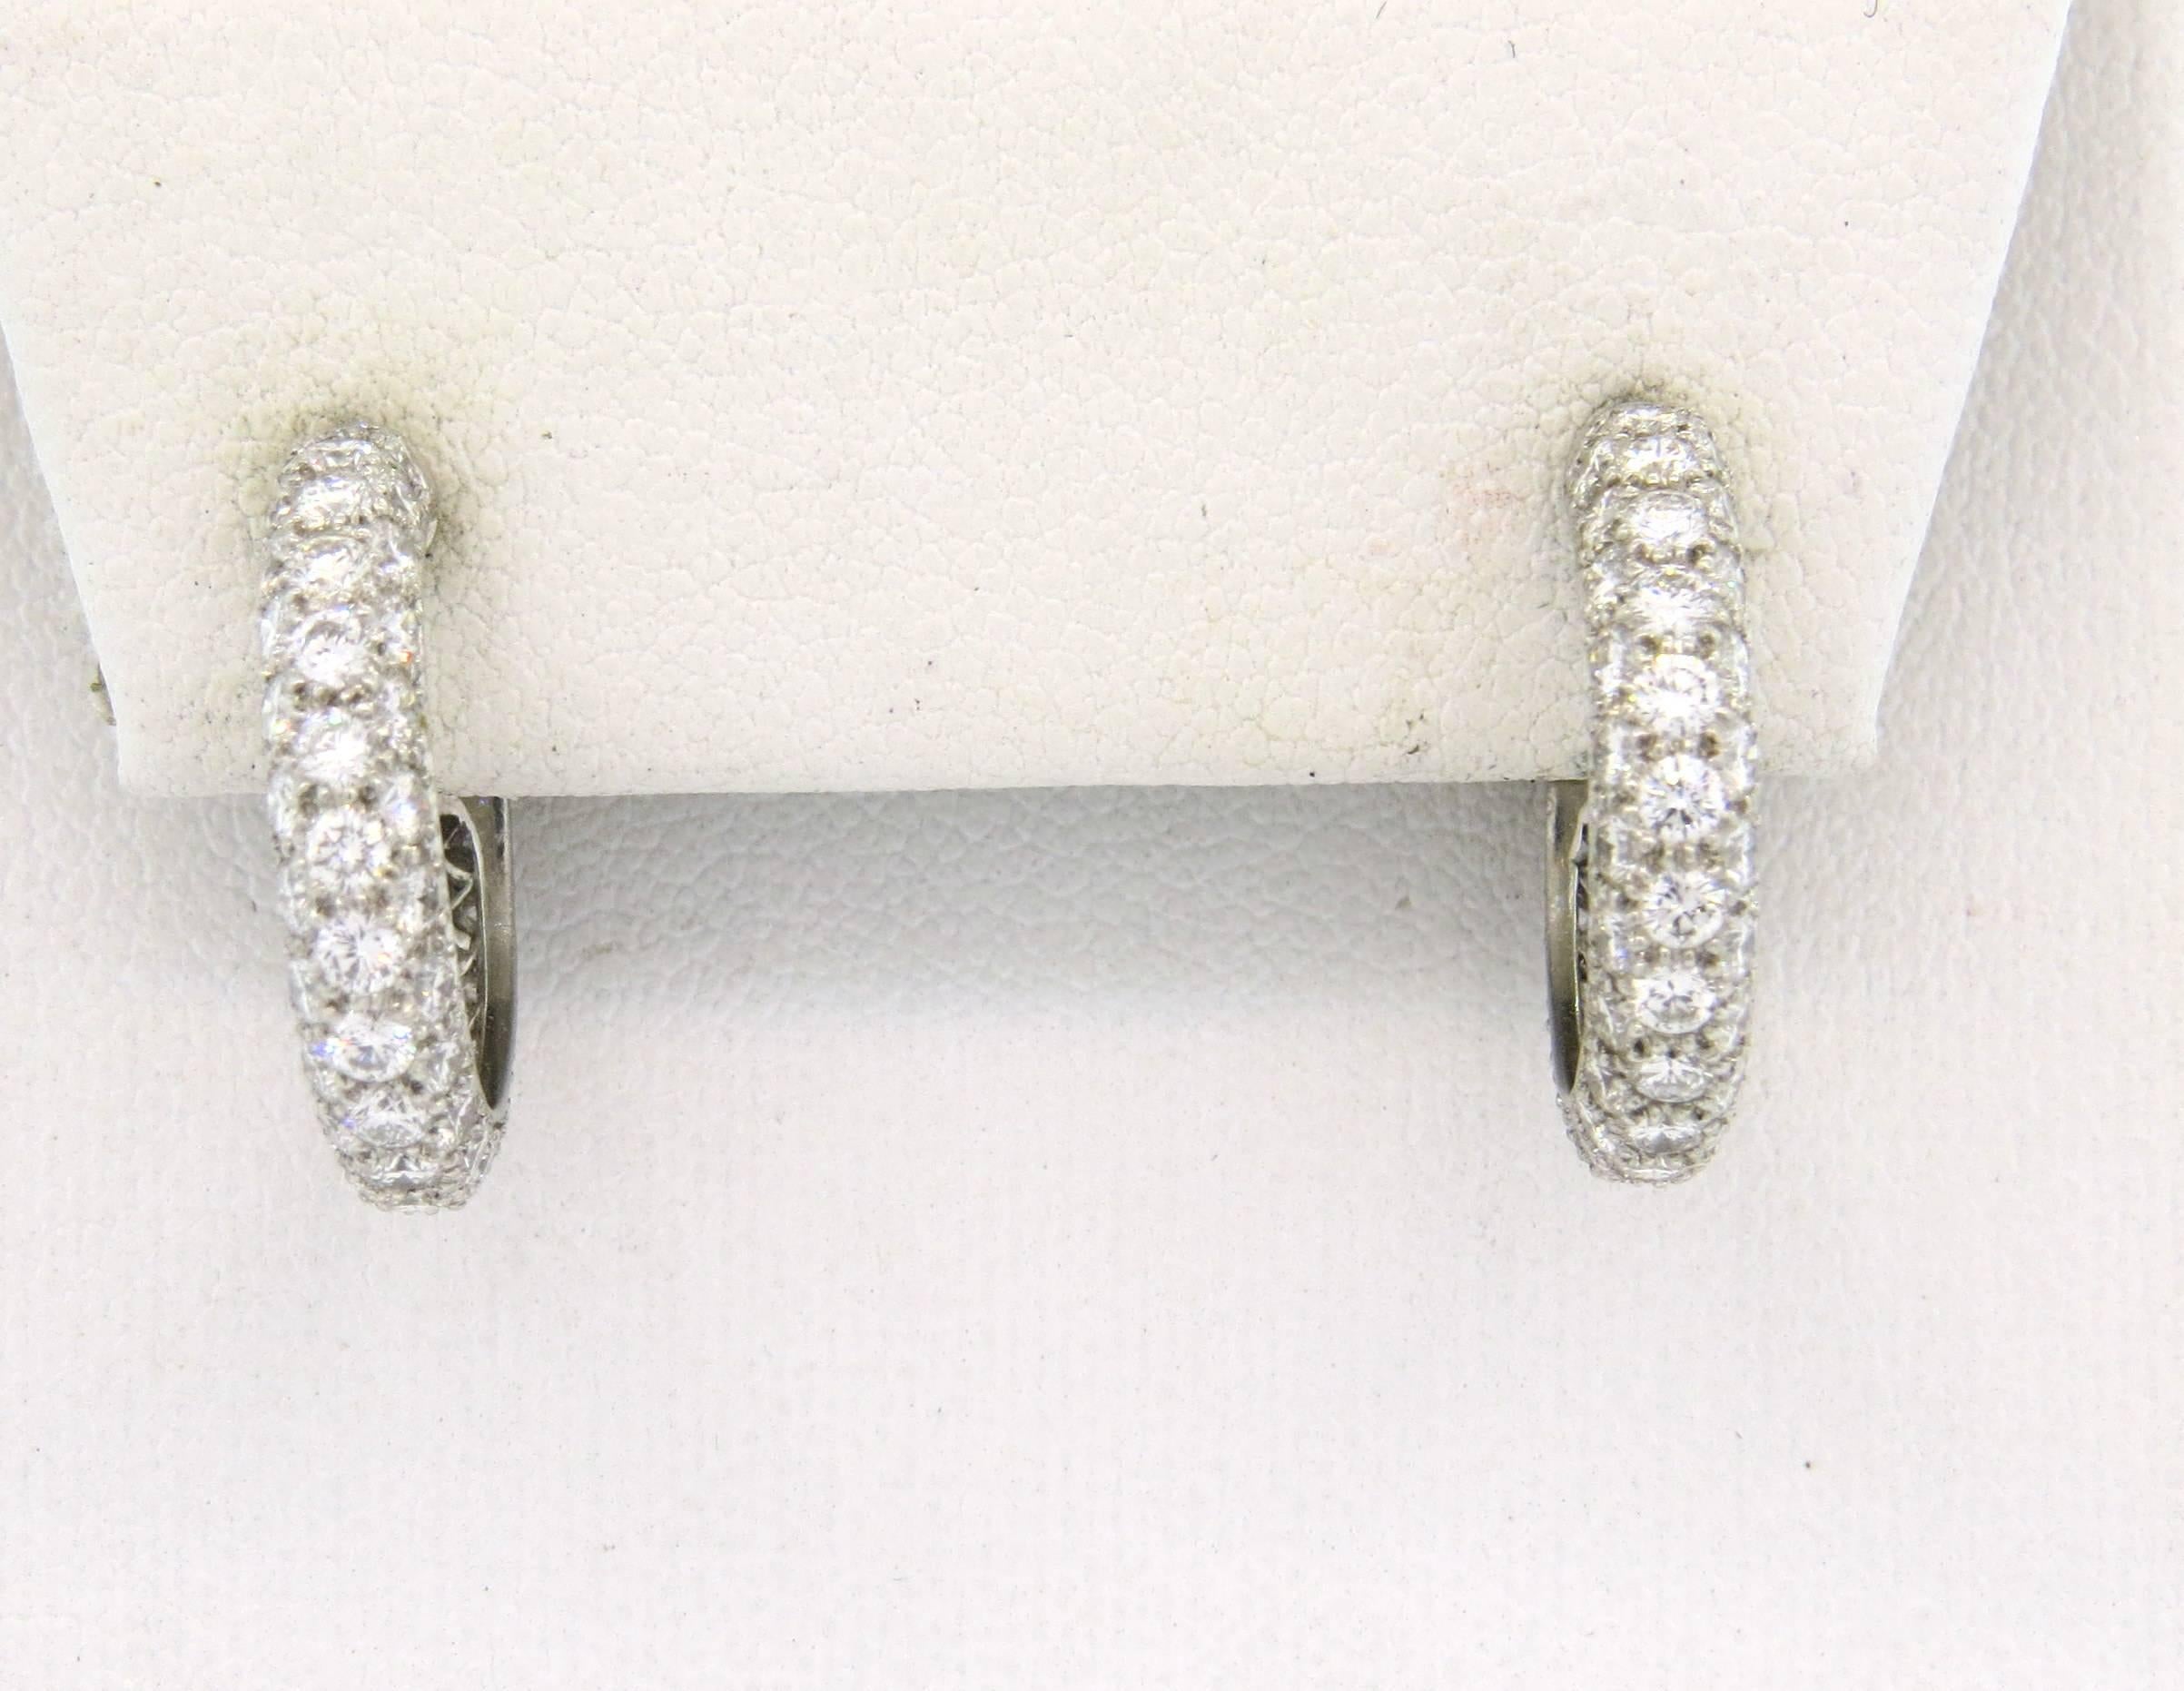 A pair of platinum hoop earrings, crafted by Tiffany & Co for Etoile collection,set with approximately 2.60ctw in G/VS diamonds. Earrings are 20mm in diameter and 4mm wide. Marked: Tiffany & Co, pt950. Weight - 7.9 grams 